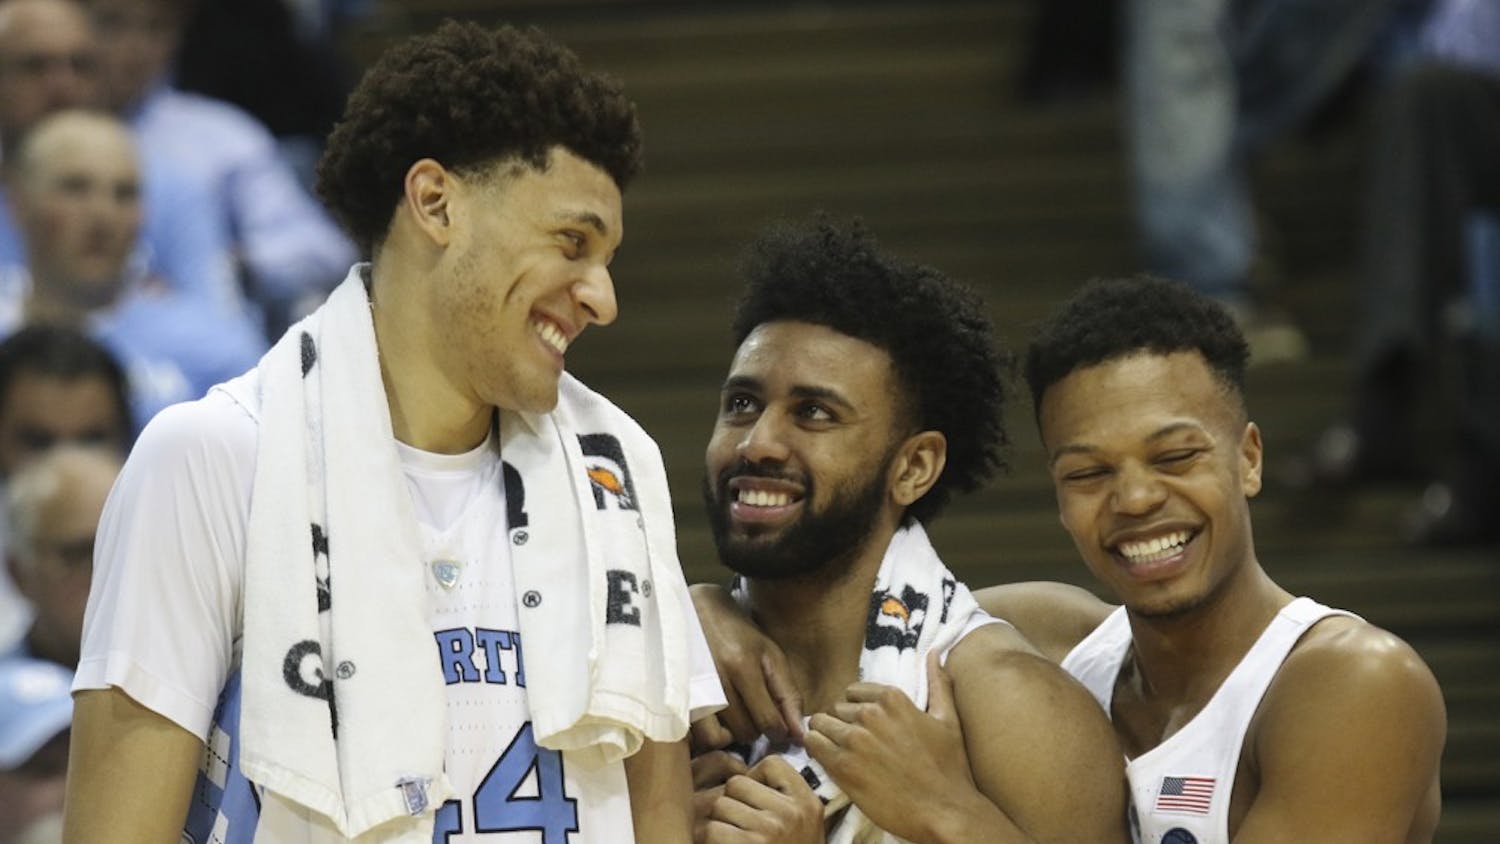 North Carolina teammates Justin Jackson (44), Joel Berry (2) and Nate Britt (0) share a laugh after defeating Duke in the Smith Center on Saturday.